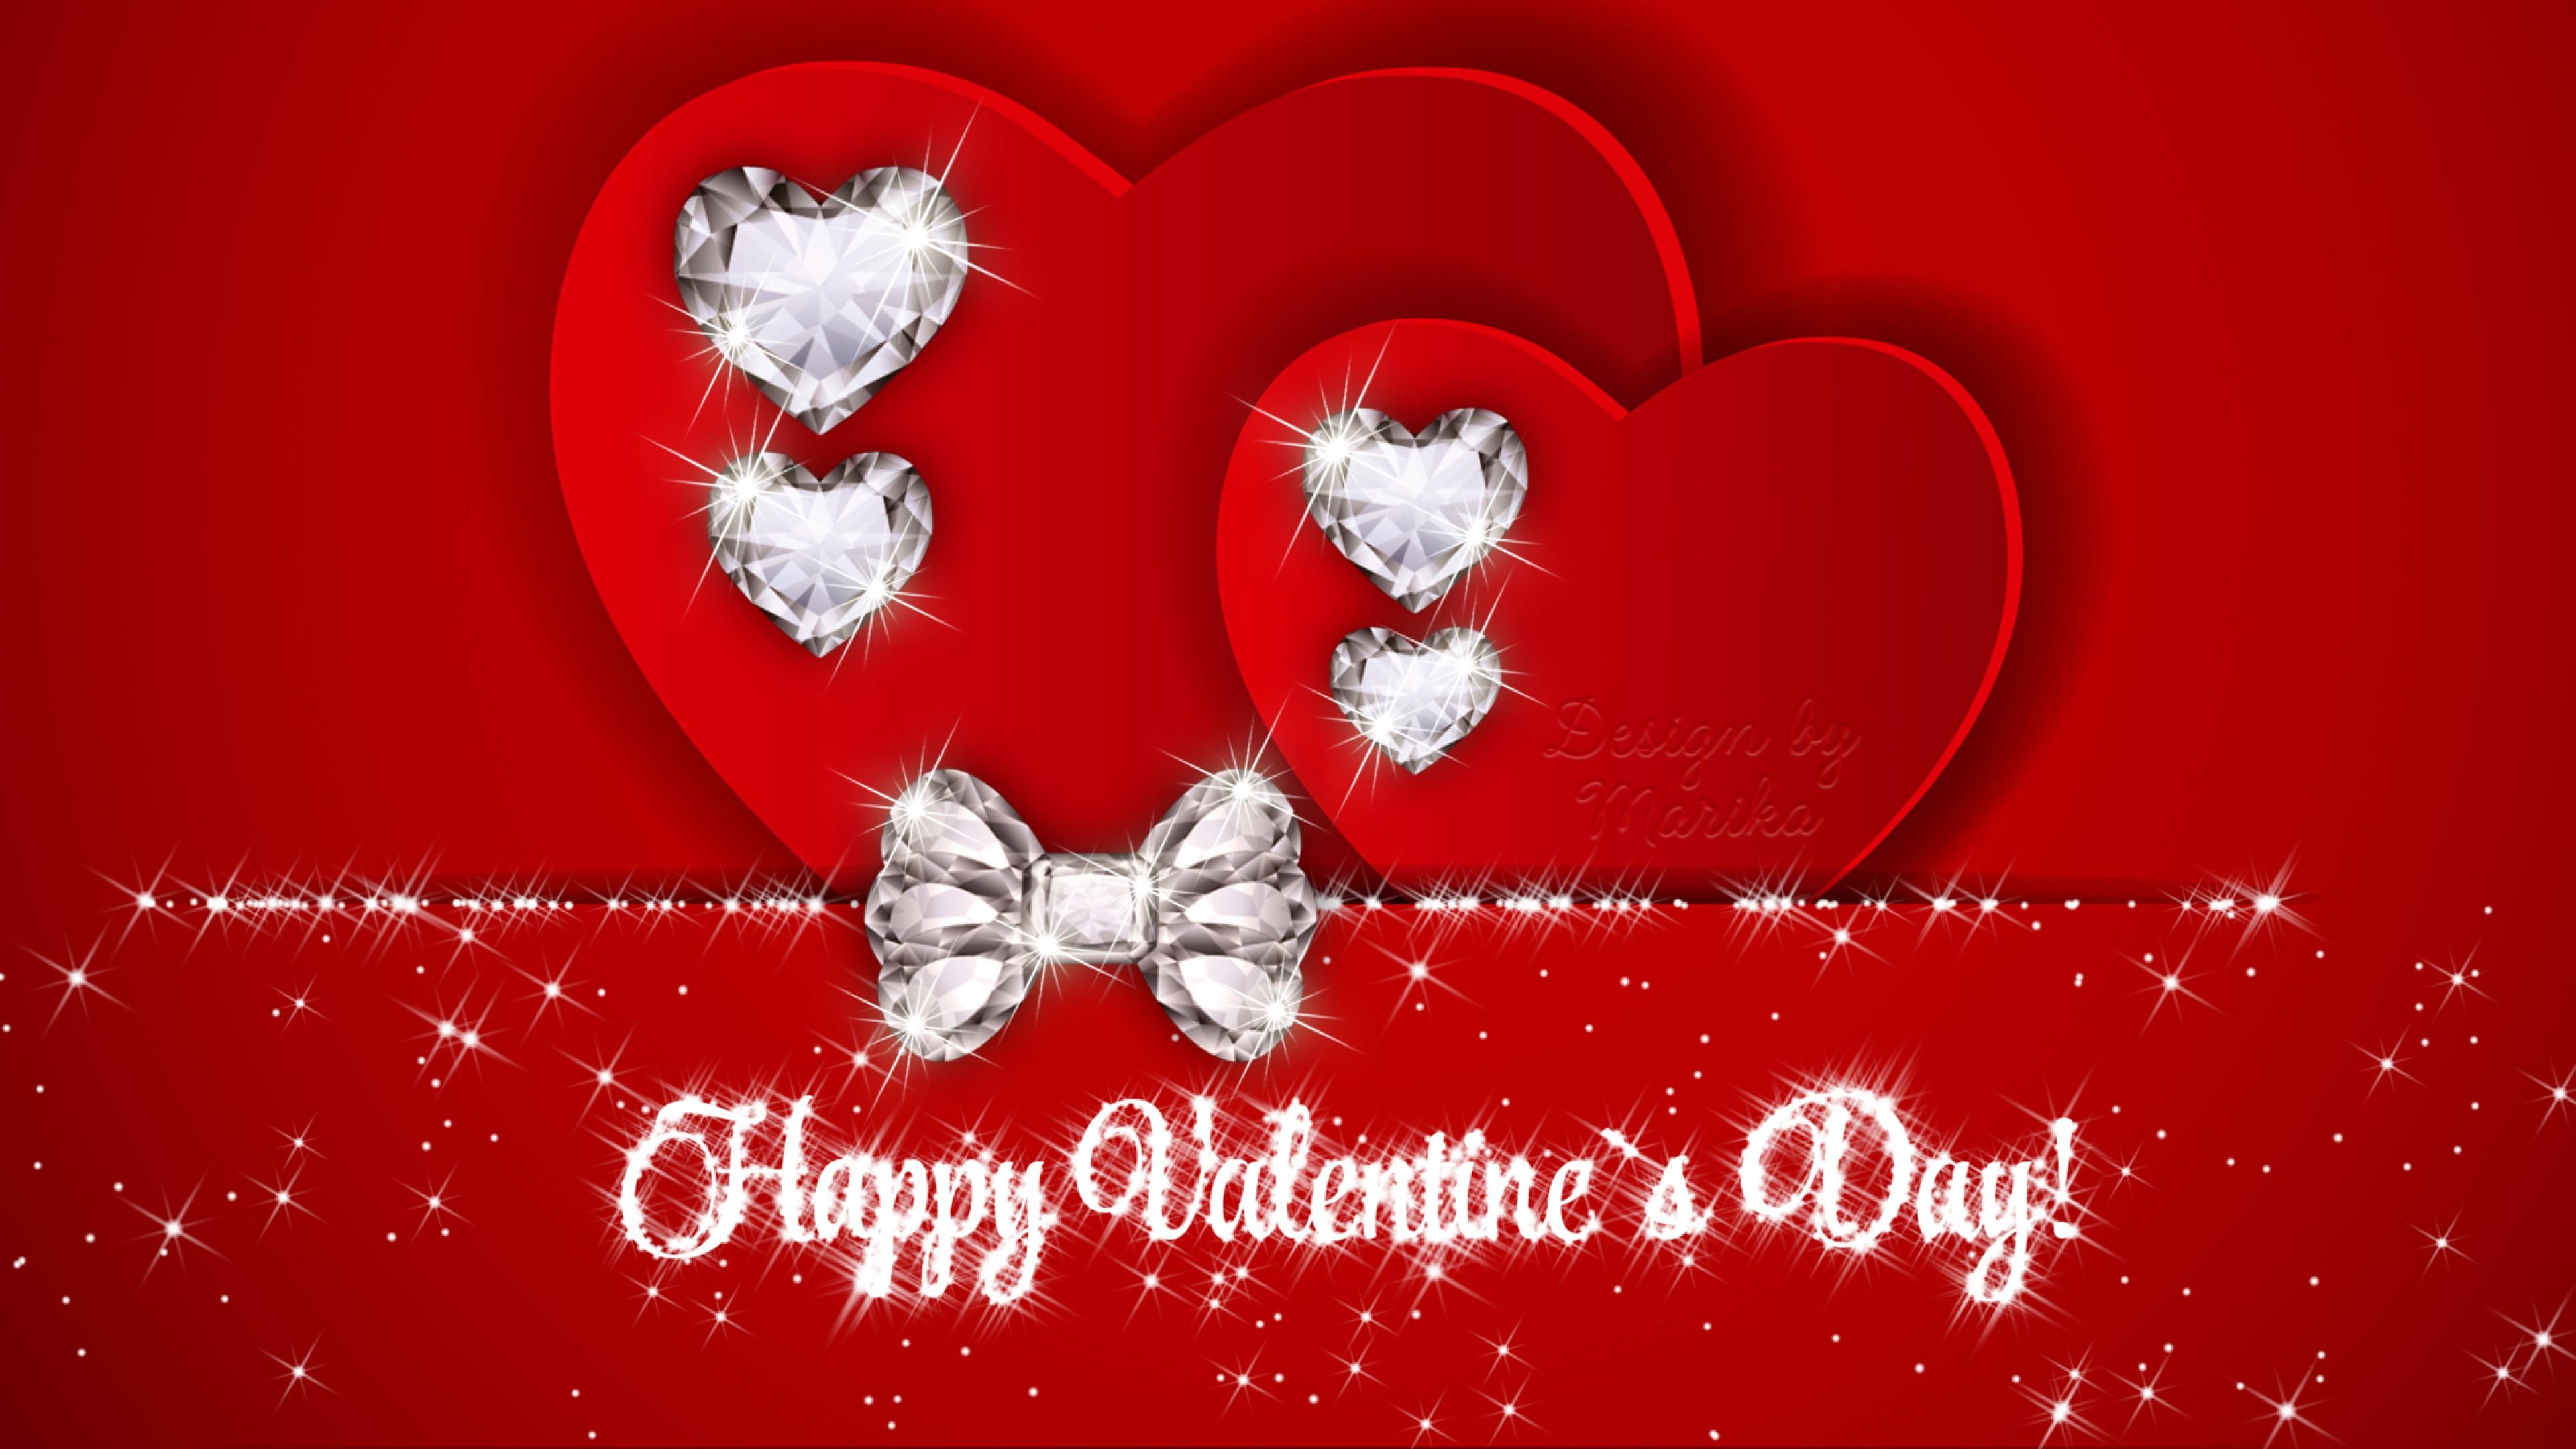 3840x2160 Most-beautiful-wallpapers-hd-free-valentine-day